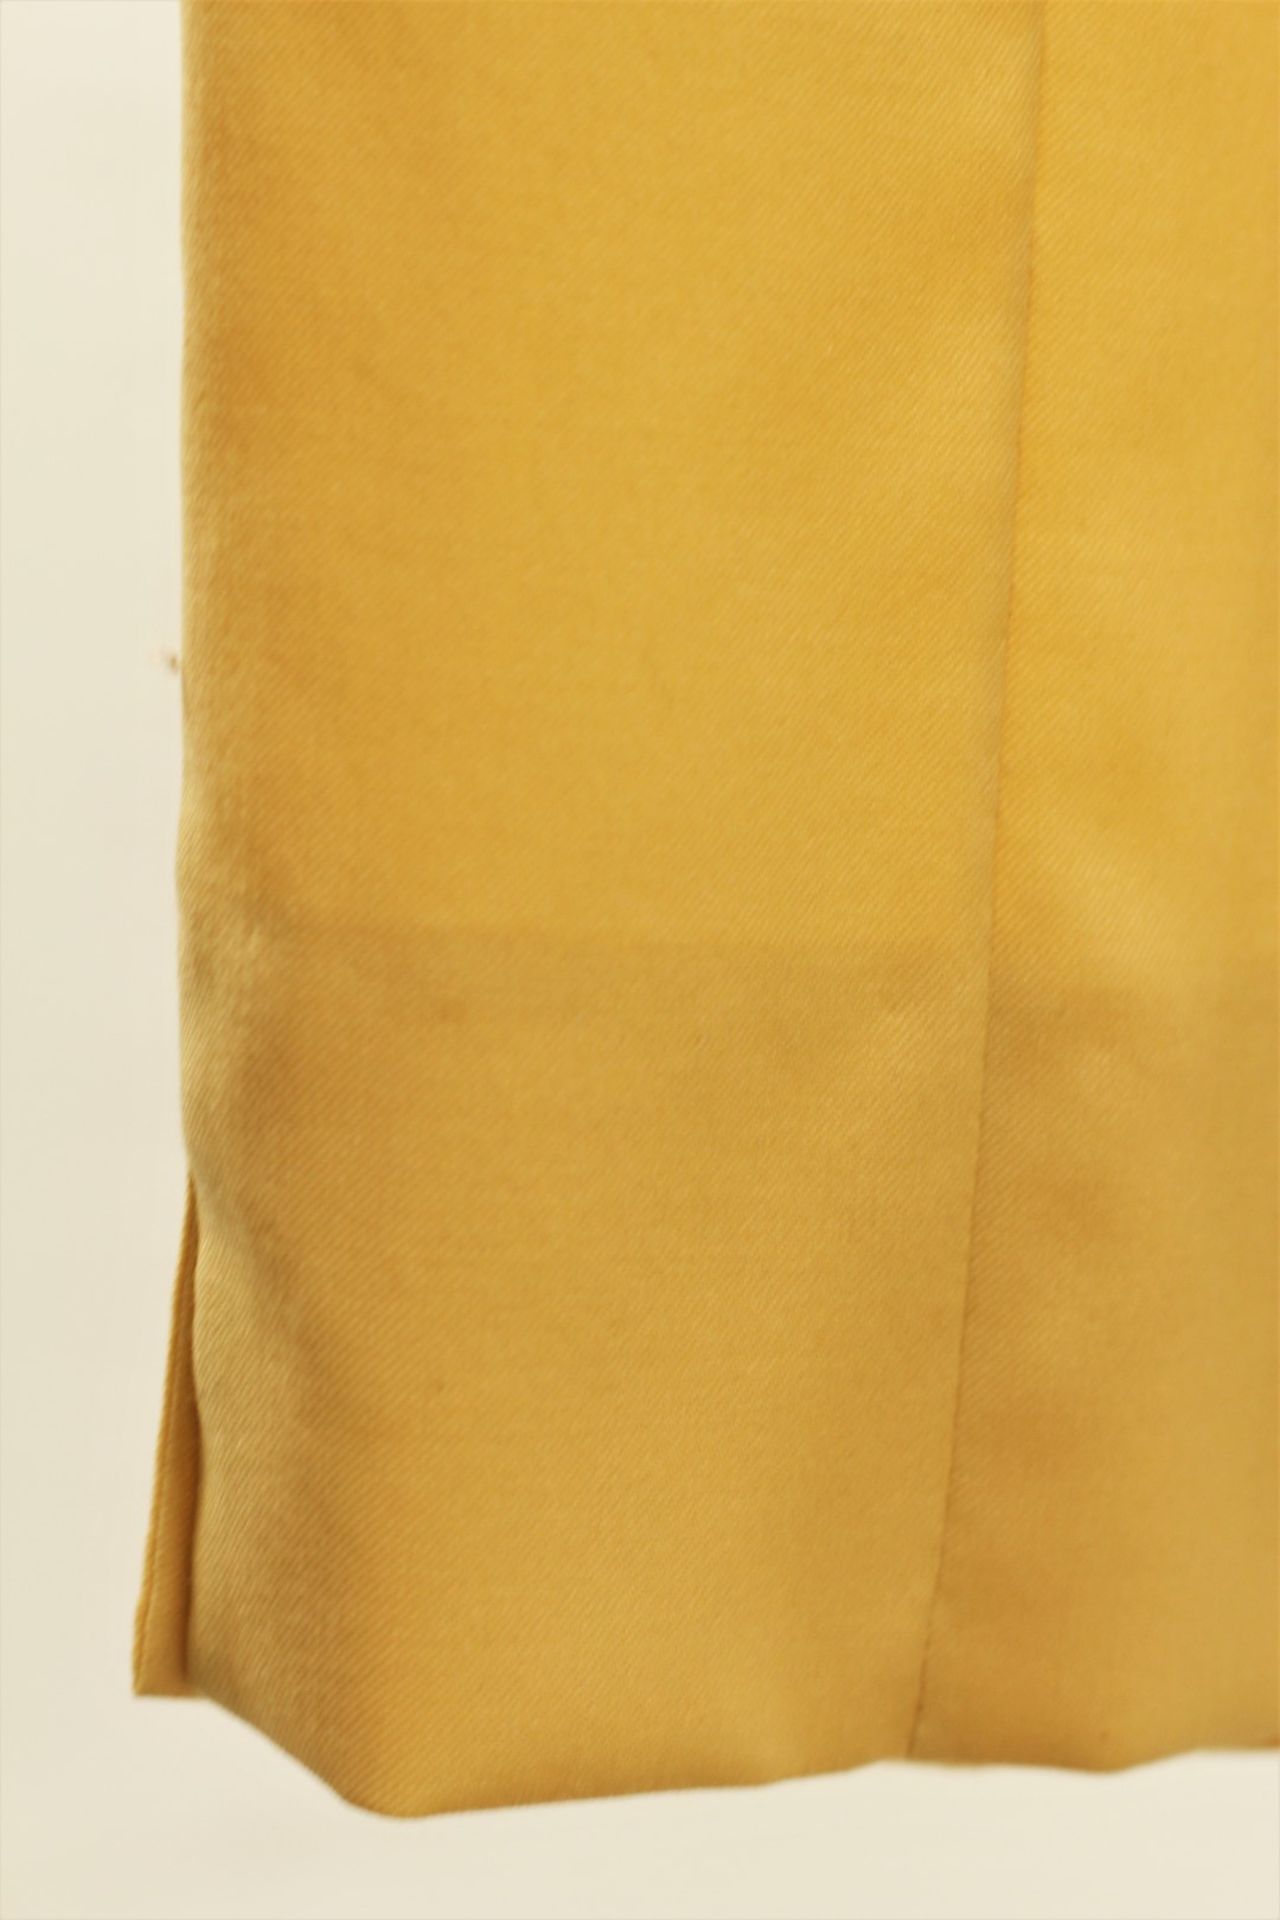 1 x Artico Cream Trousers - Size: 18 - Material: 100% Leather. Lining 50% viscose, 50% Acetate - - Image 3 of 9